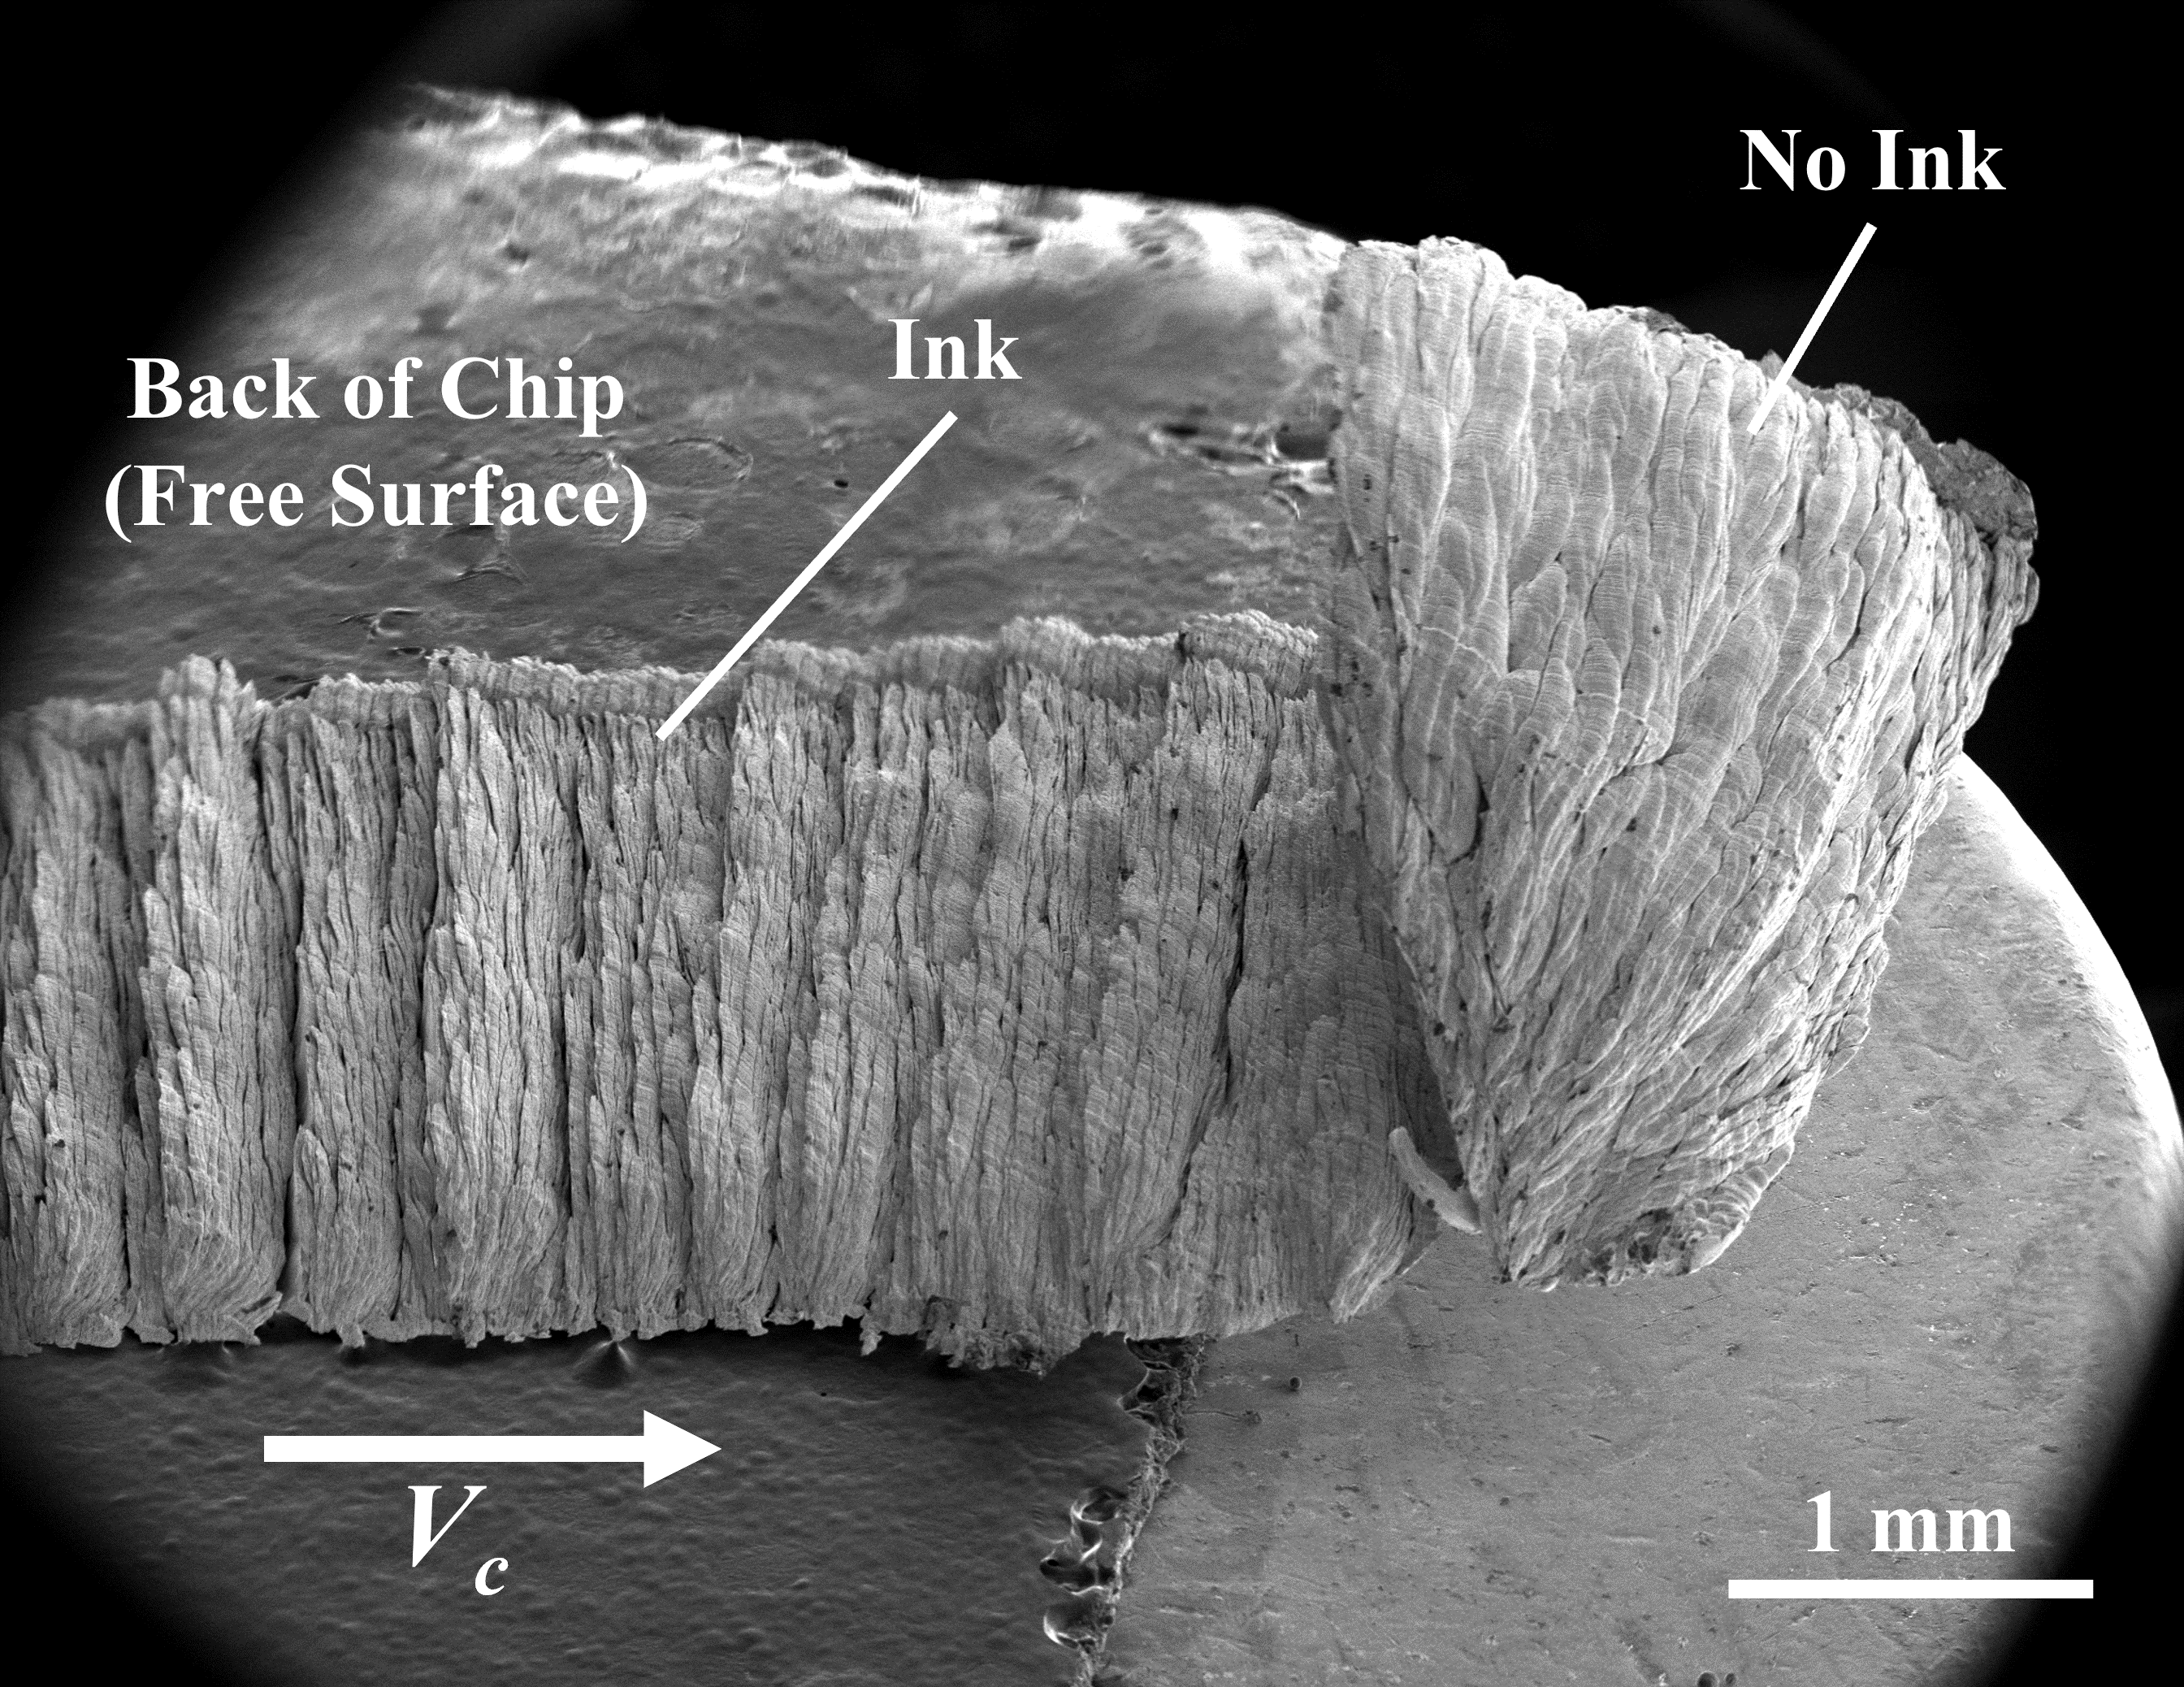 Figure 1: SEM image of chip (free surface of chip) produced by cutting Ta workpiece that is coated with an ink medium only along part of its cutting length. The initial part of the cutting length is uncoated. The non-inked region shows a very thick chip (~34-fold thickening), with mushroom-like free- surface morphology, formed by sinuous ﬂow and folding. In contrast, the chip from the inked-region is quite thin (~5-fold thickening) and forms by seg-mentation ﬂow. Cutting parameters: α = 10◦, h0 = 50 μm, V0 = 2 mm/s.